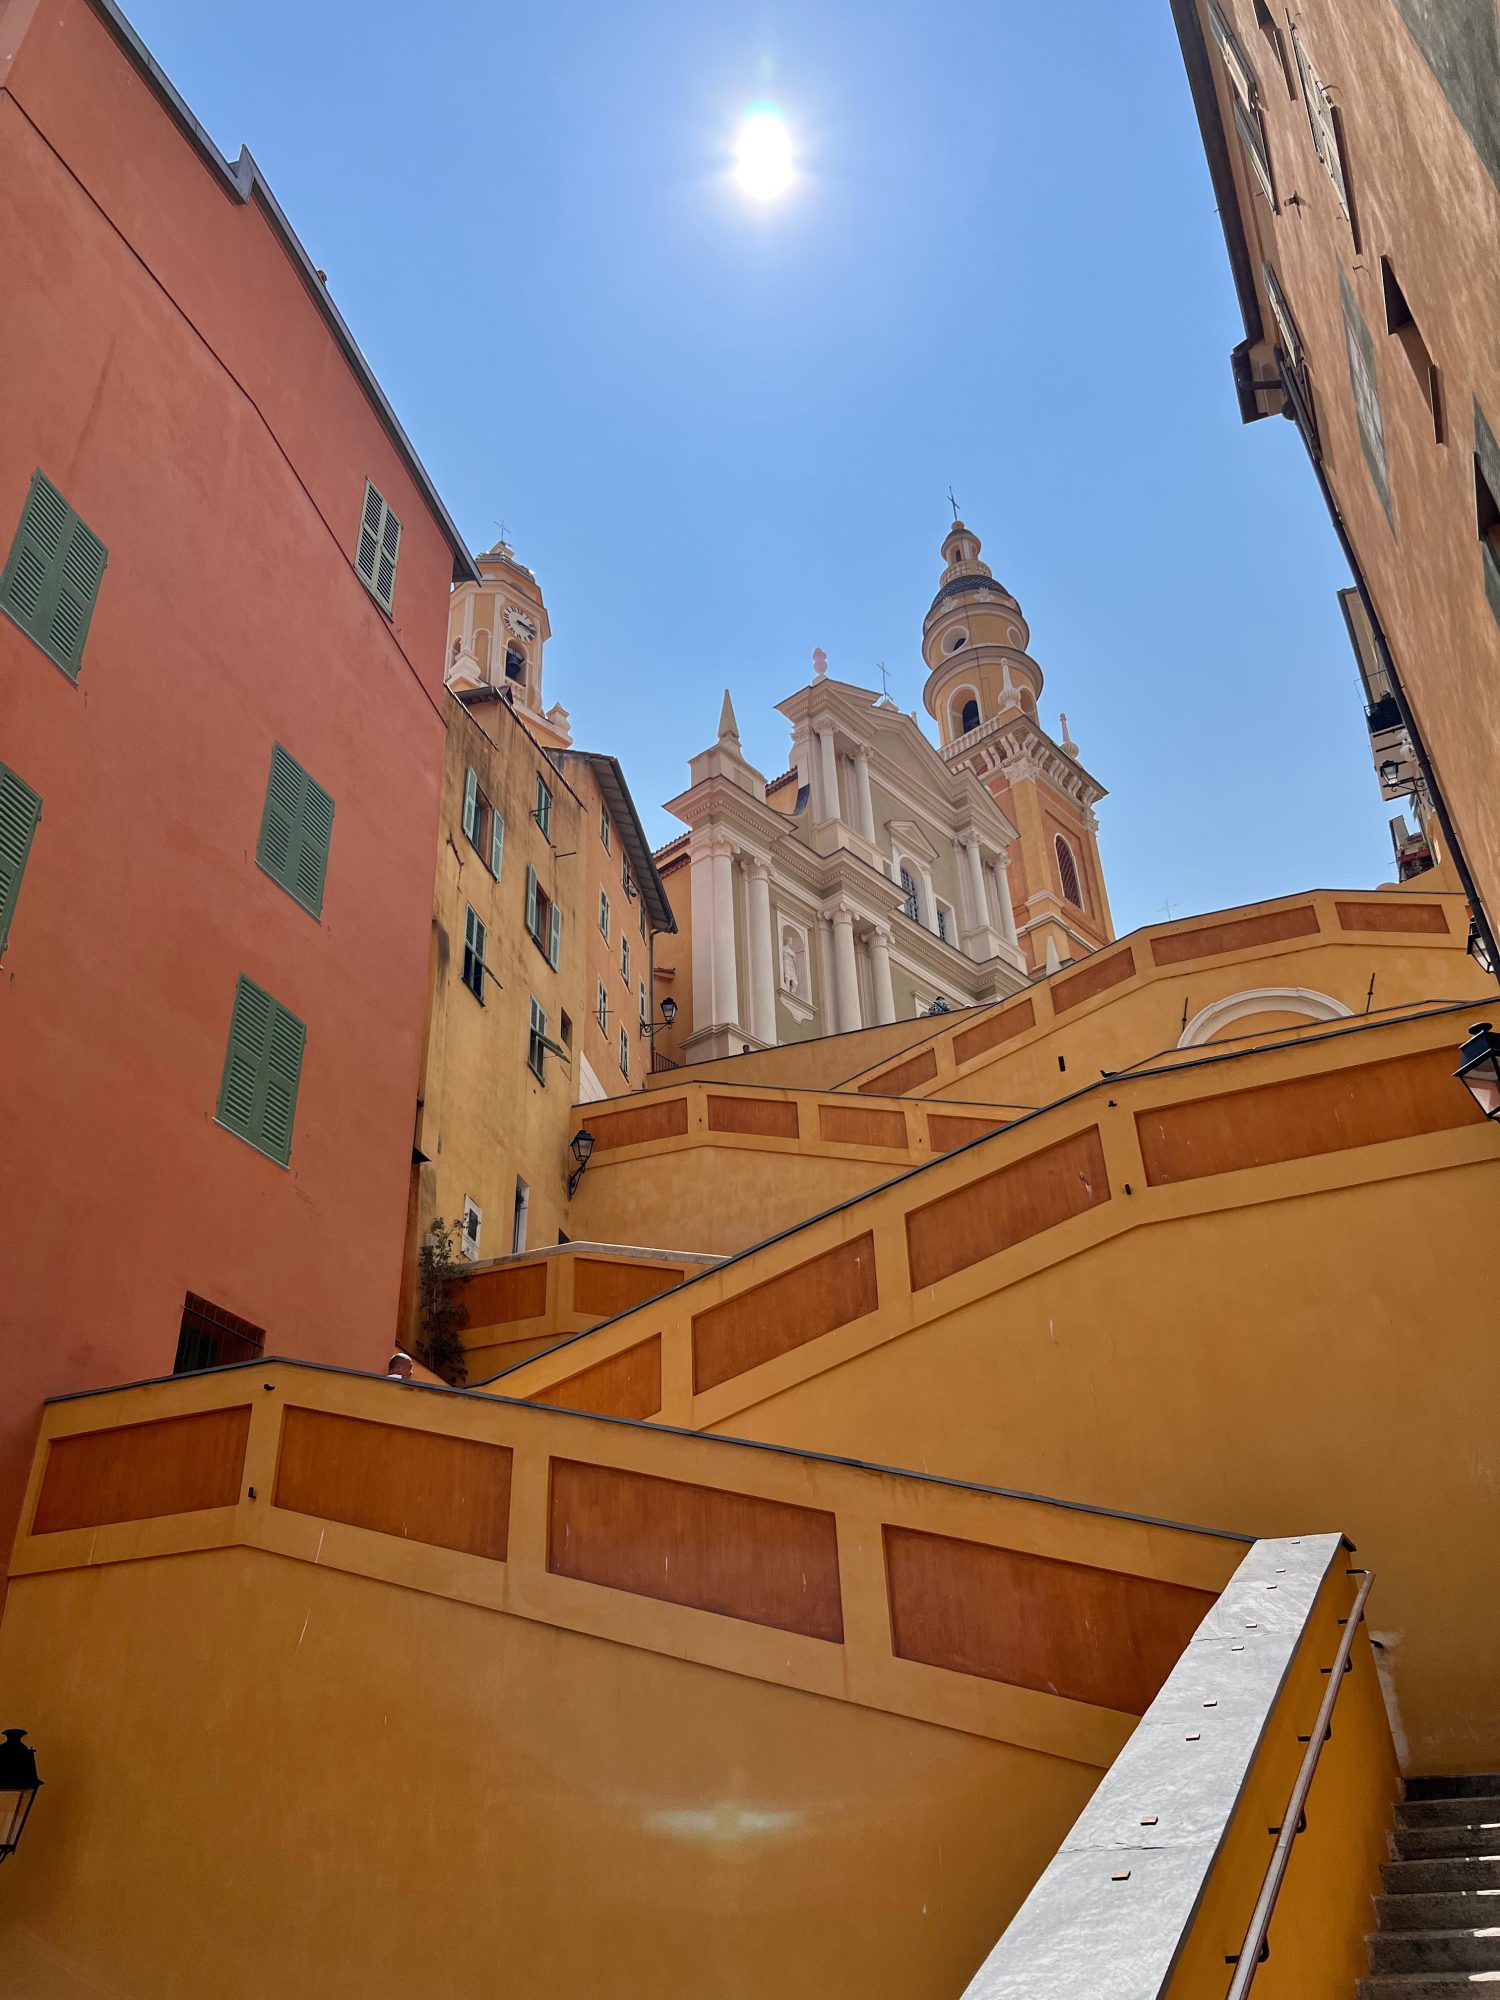 steps and architecture leading up to the top of Menton, France.